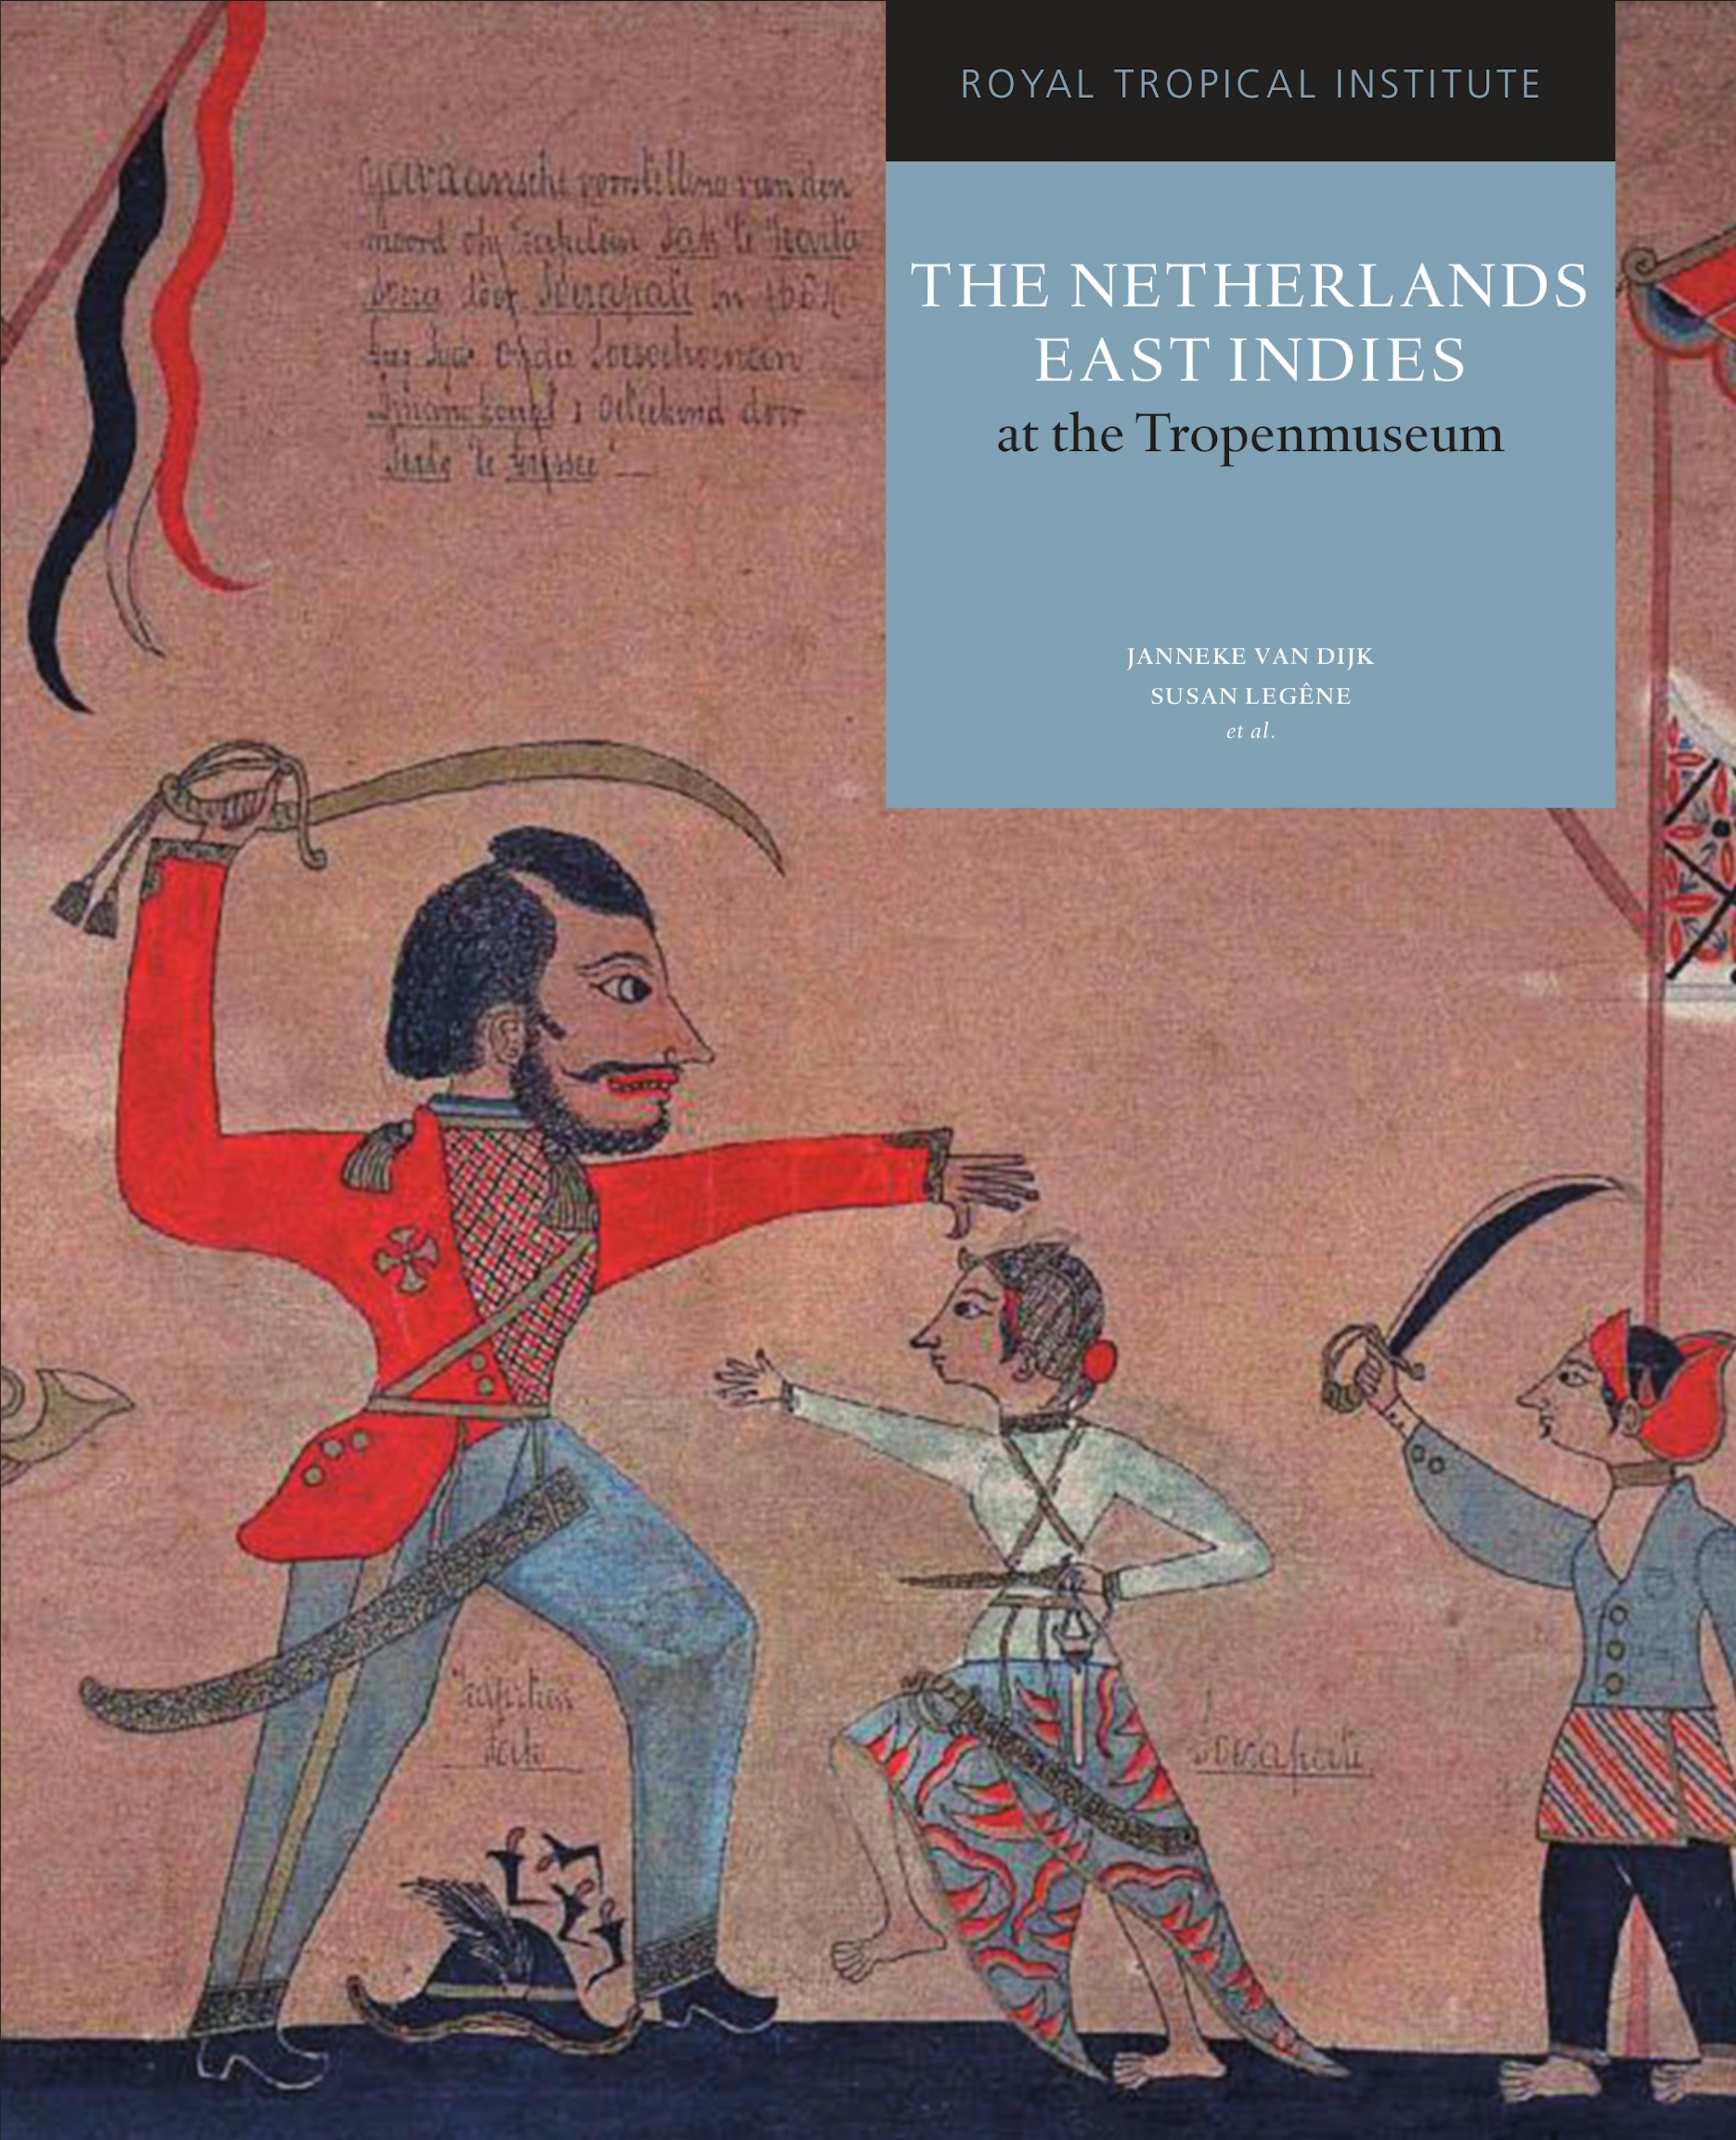 The Netherlands East Indies at the Tropenmuseum